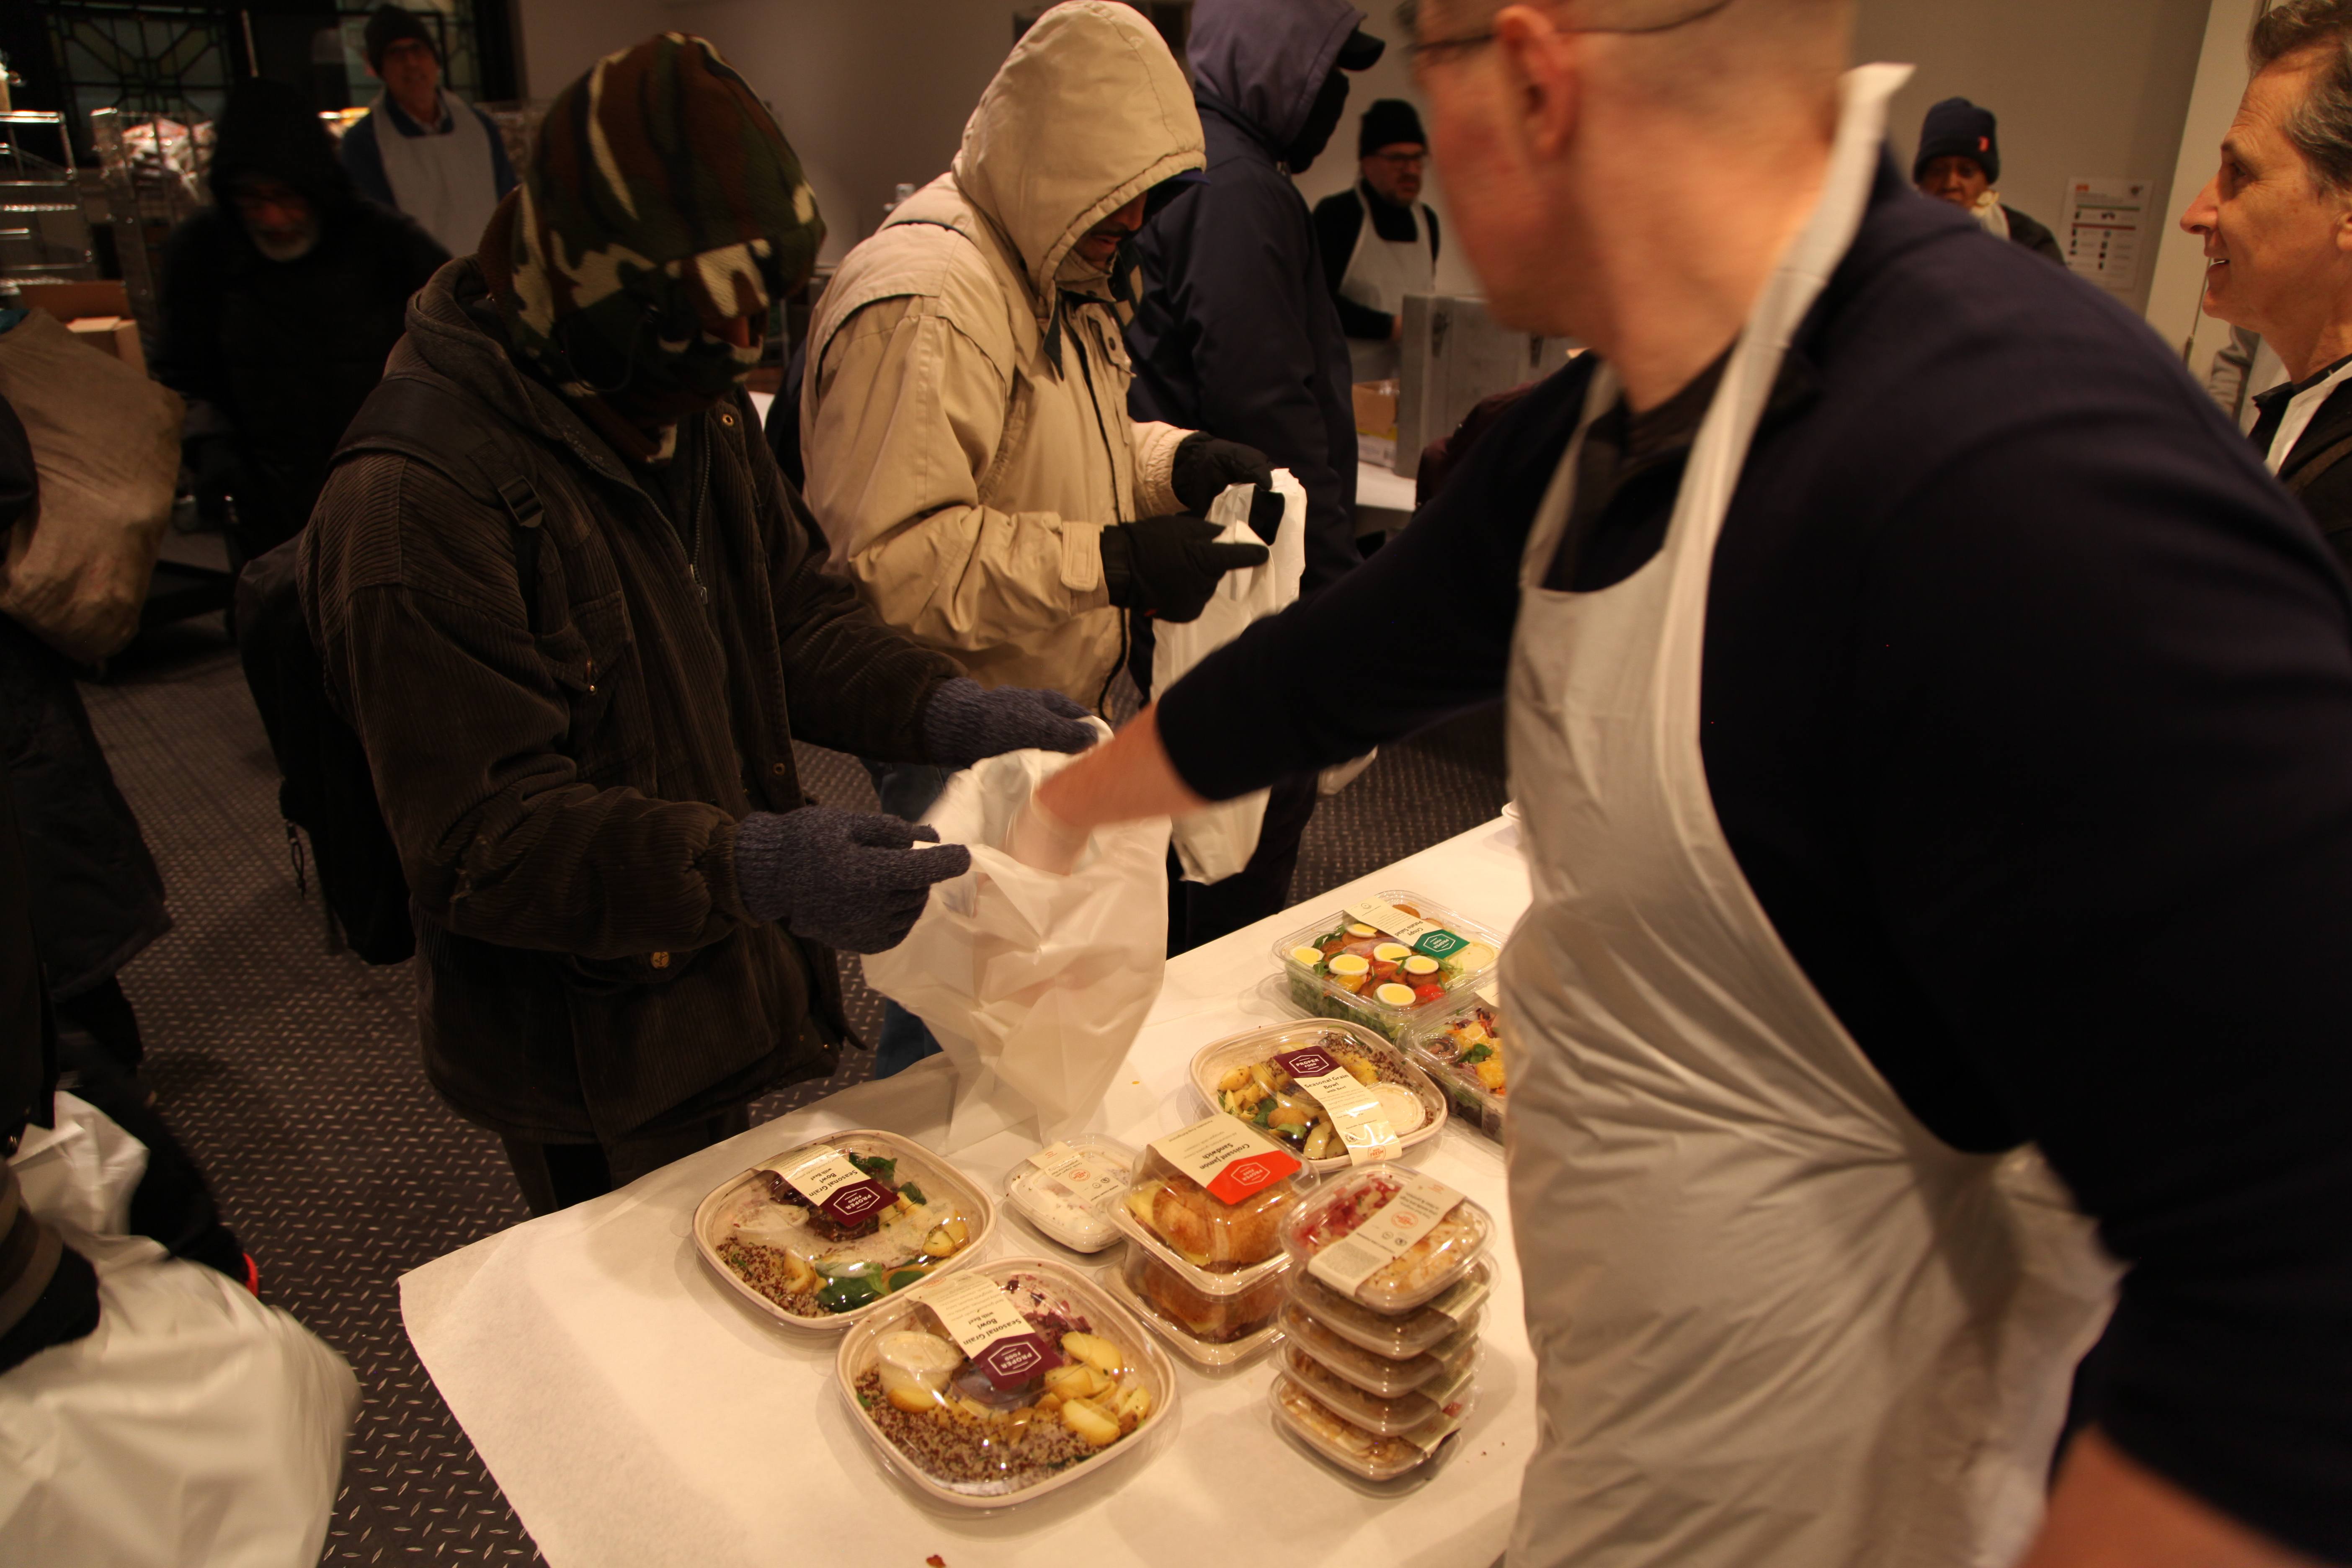 Indoors, someone placing food into a bag that someone is holding out. In the foreground is a series of different meal options.